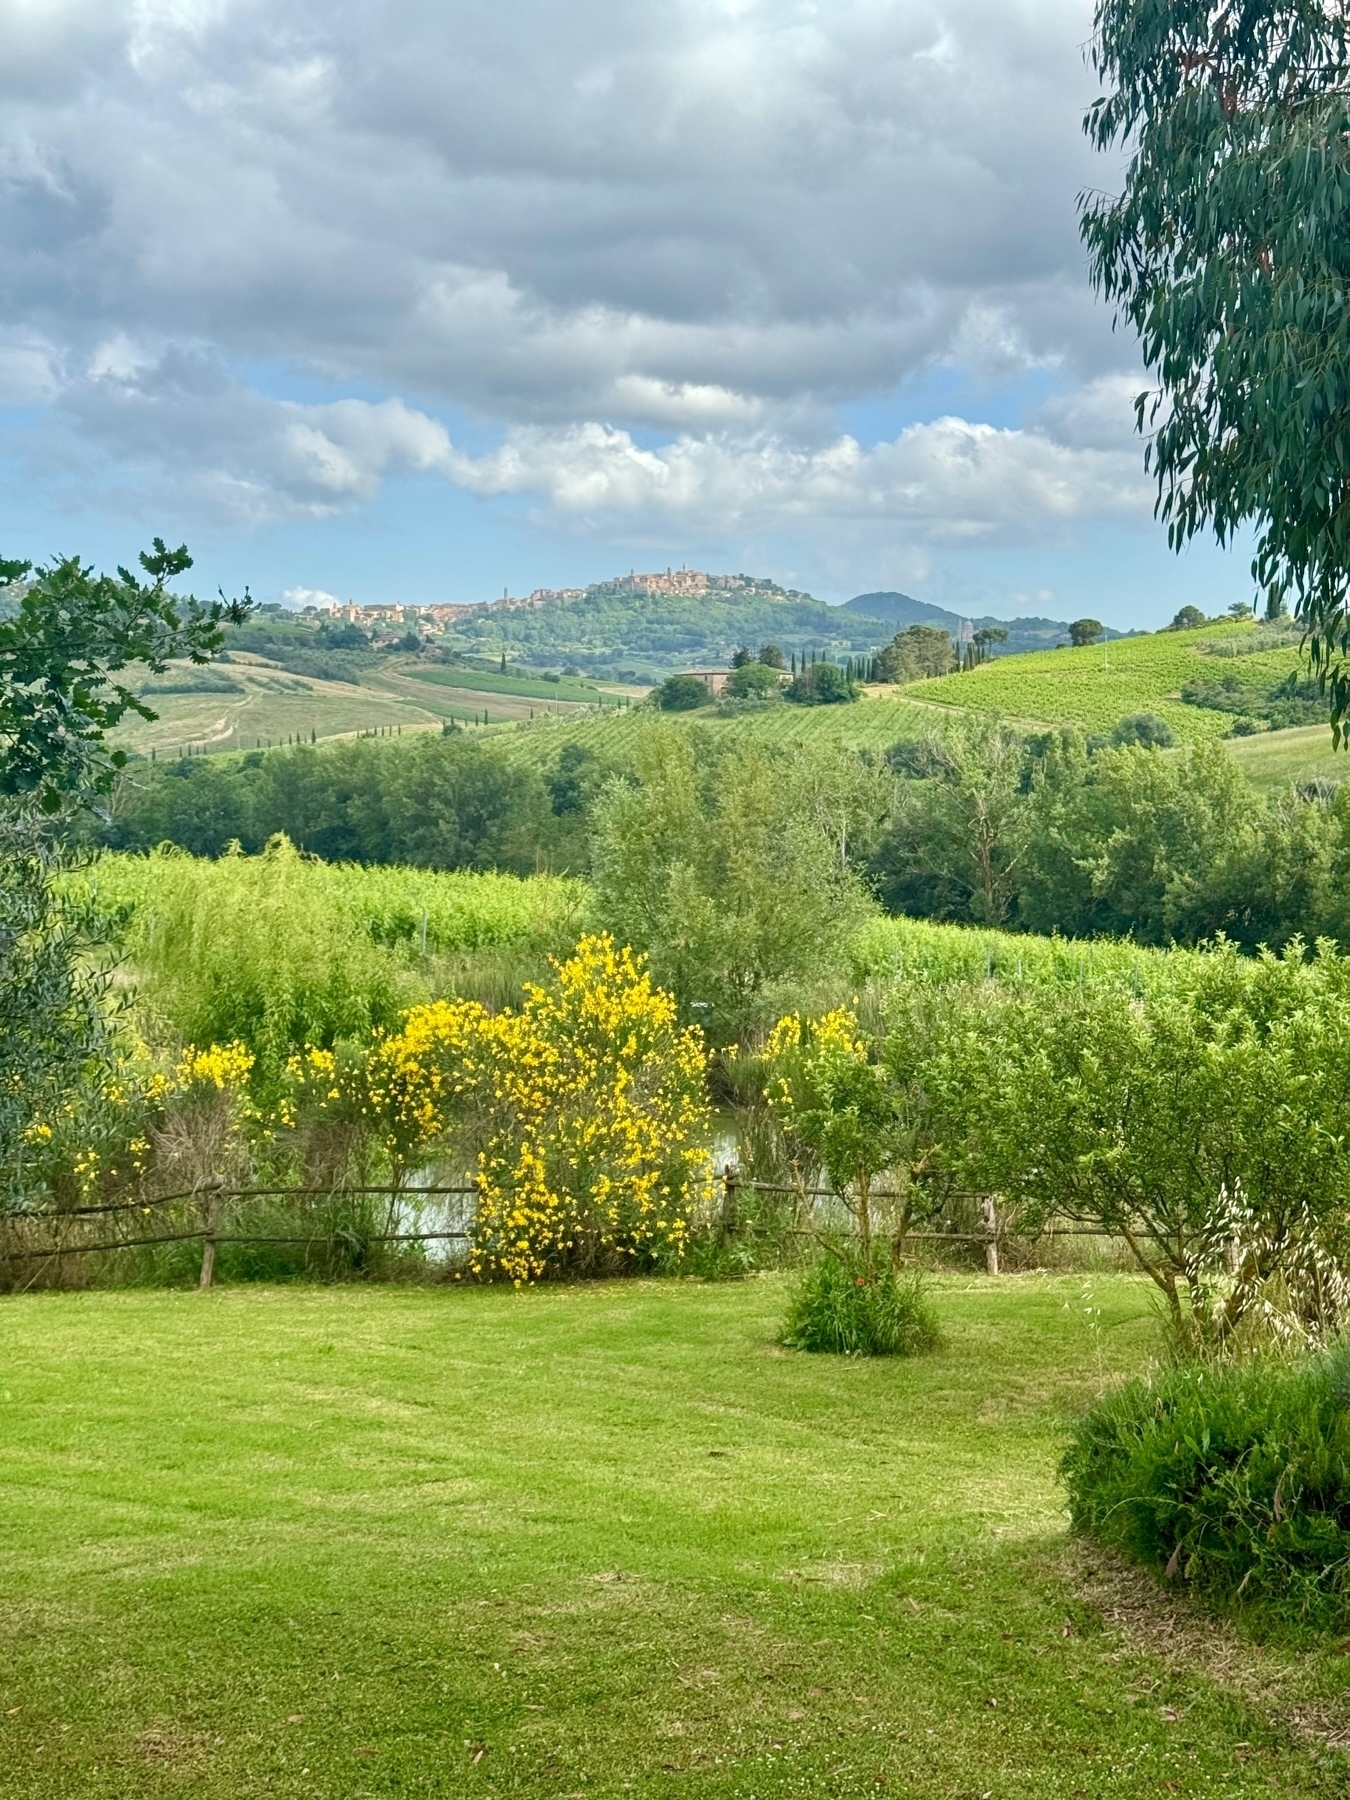 A scenic landscape featuring rolling green hills, yellow flowering bushes, and a distant hilltop town under a partly cloudy sky. Trees and shrubs dot the foreground, and a wooden fence lines part of the scene.